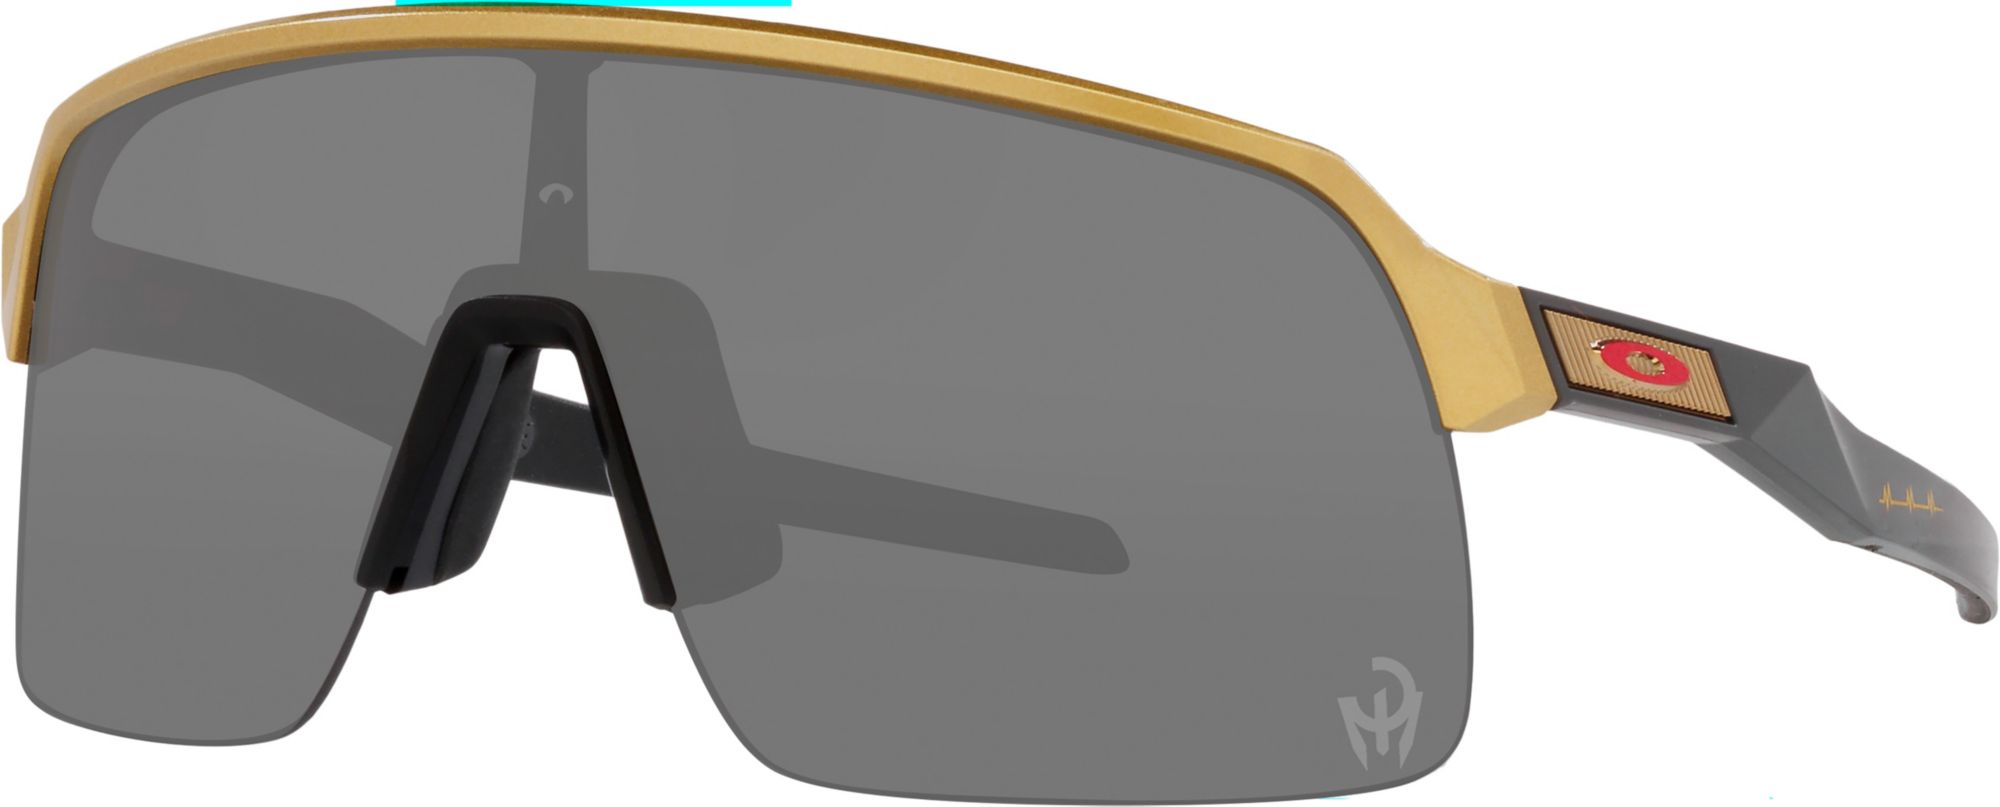 Photos - Sunglasses Oakley Sutro Lite Patrick Mahomes II Collection , Olympic Gold/P 